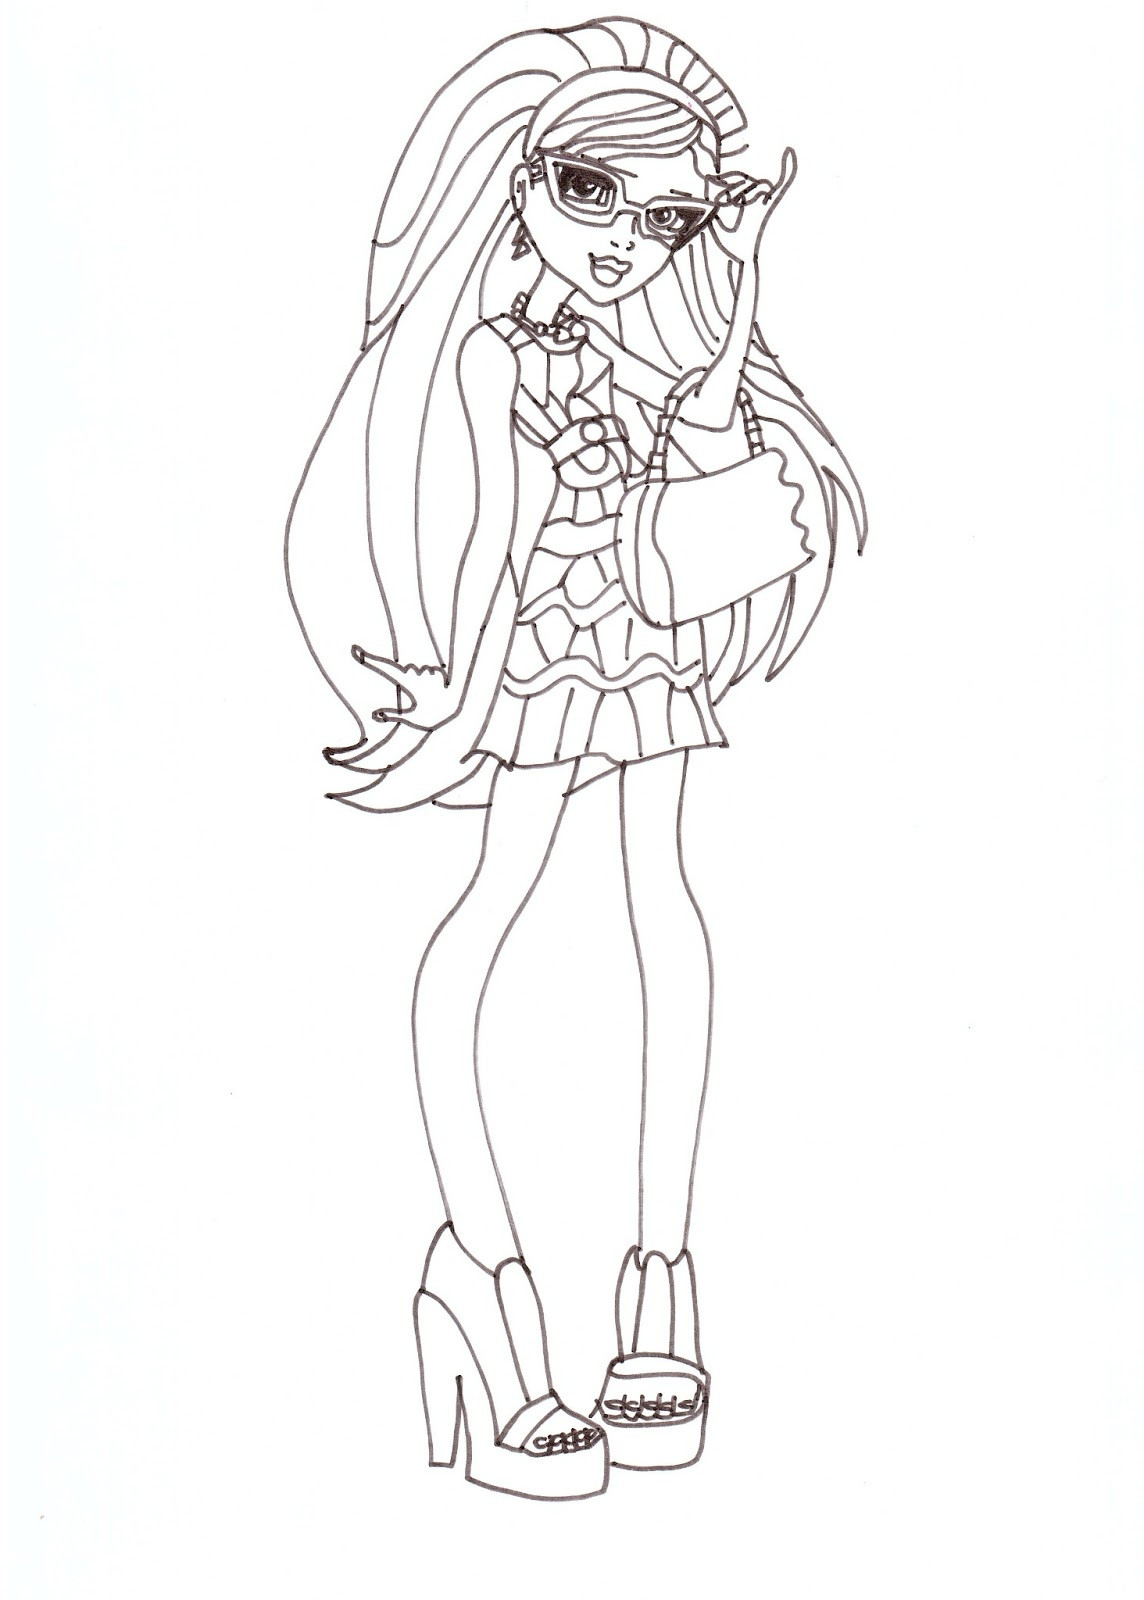 Online Printable Coloring Pages
 Free Printable Monster High Coloring Pages December 2012